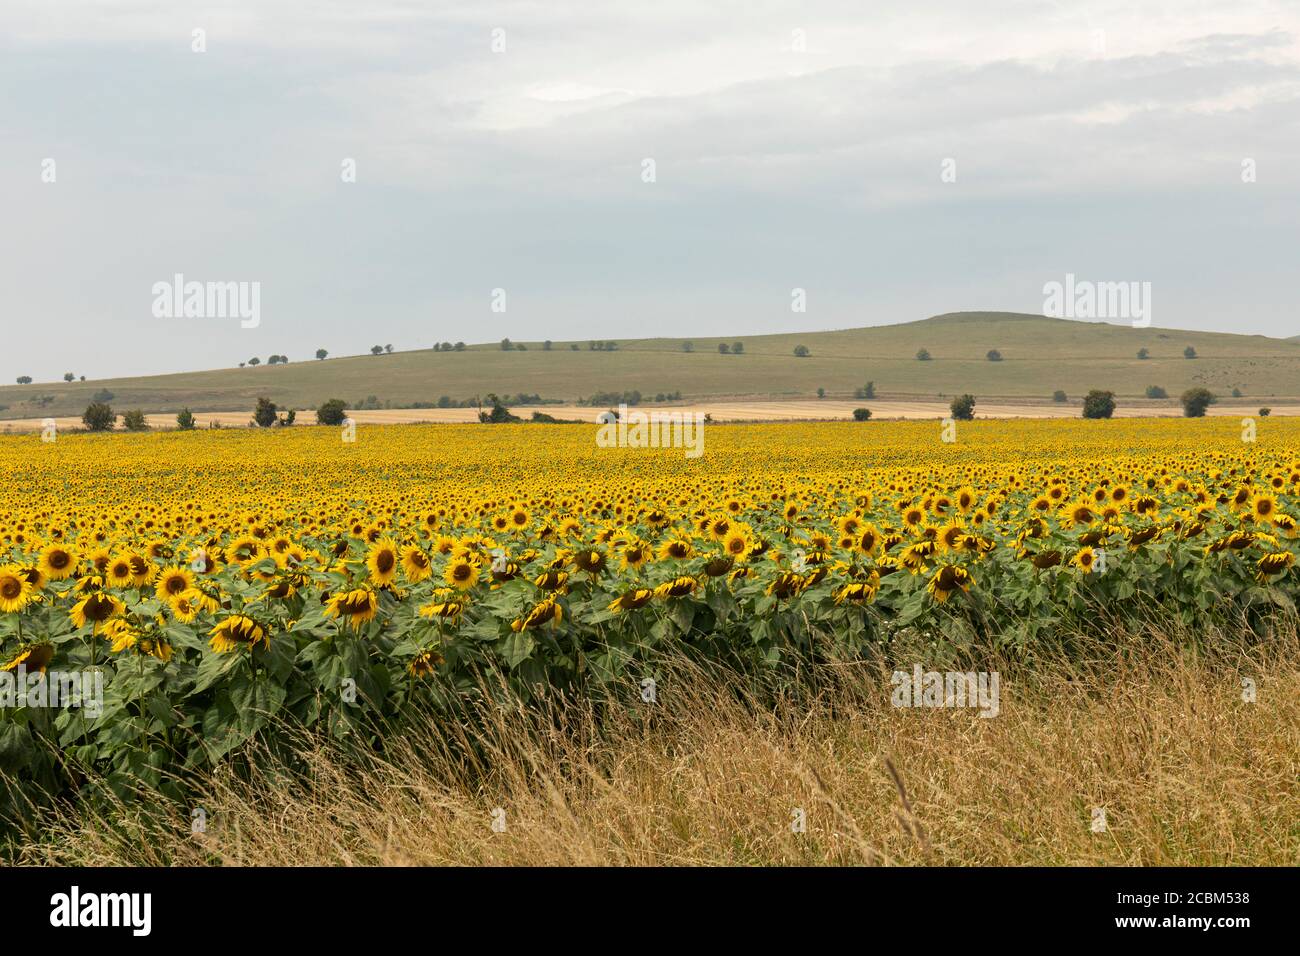 A Sunflower field full of bright sunflowers in Stanton St Bernard, Wiltshire.  Taken during a hot summer day with heat haze. Pewsey Downs, England, UK Stock Photo